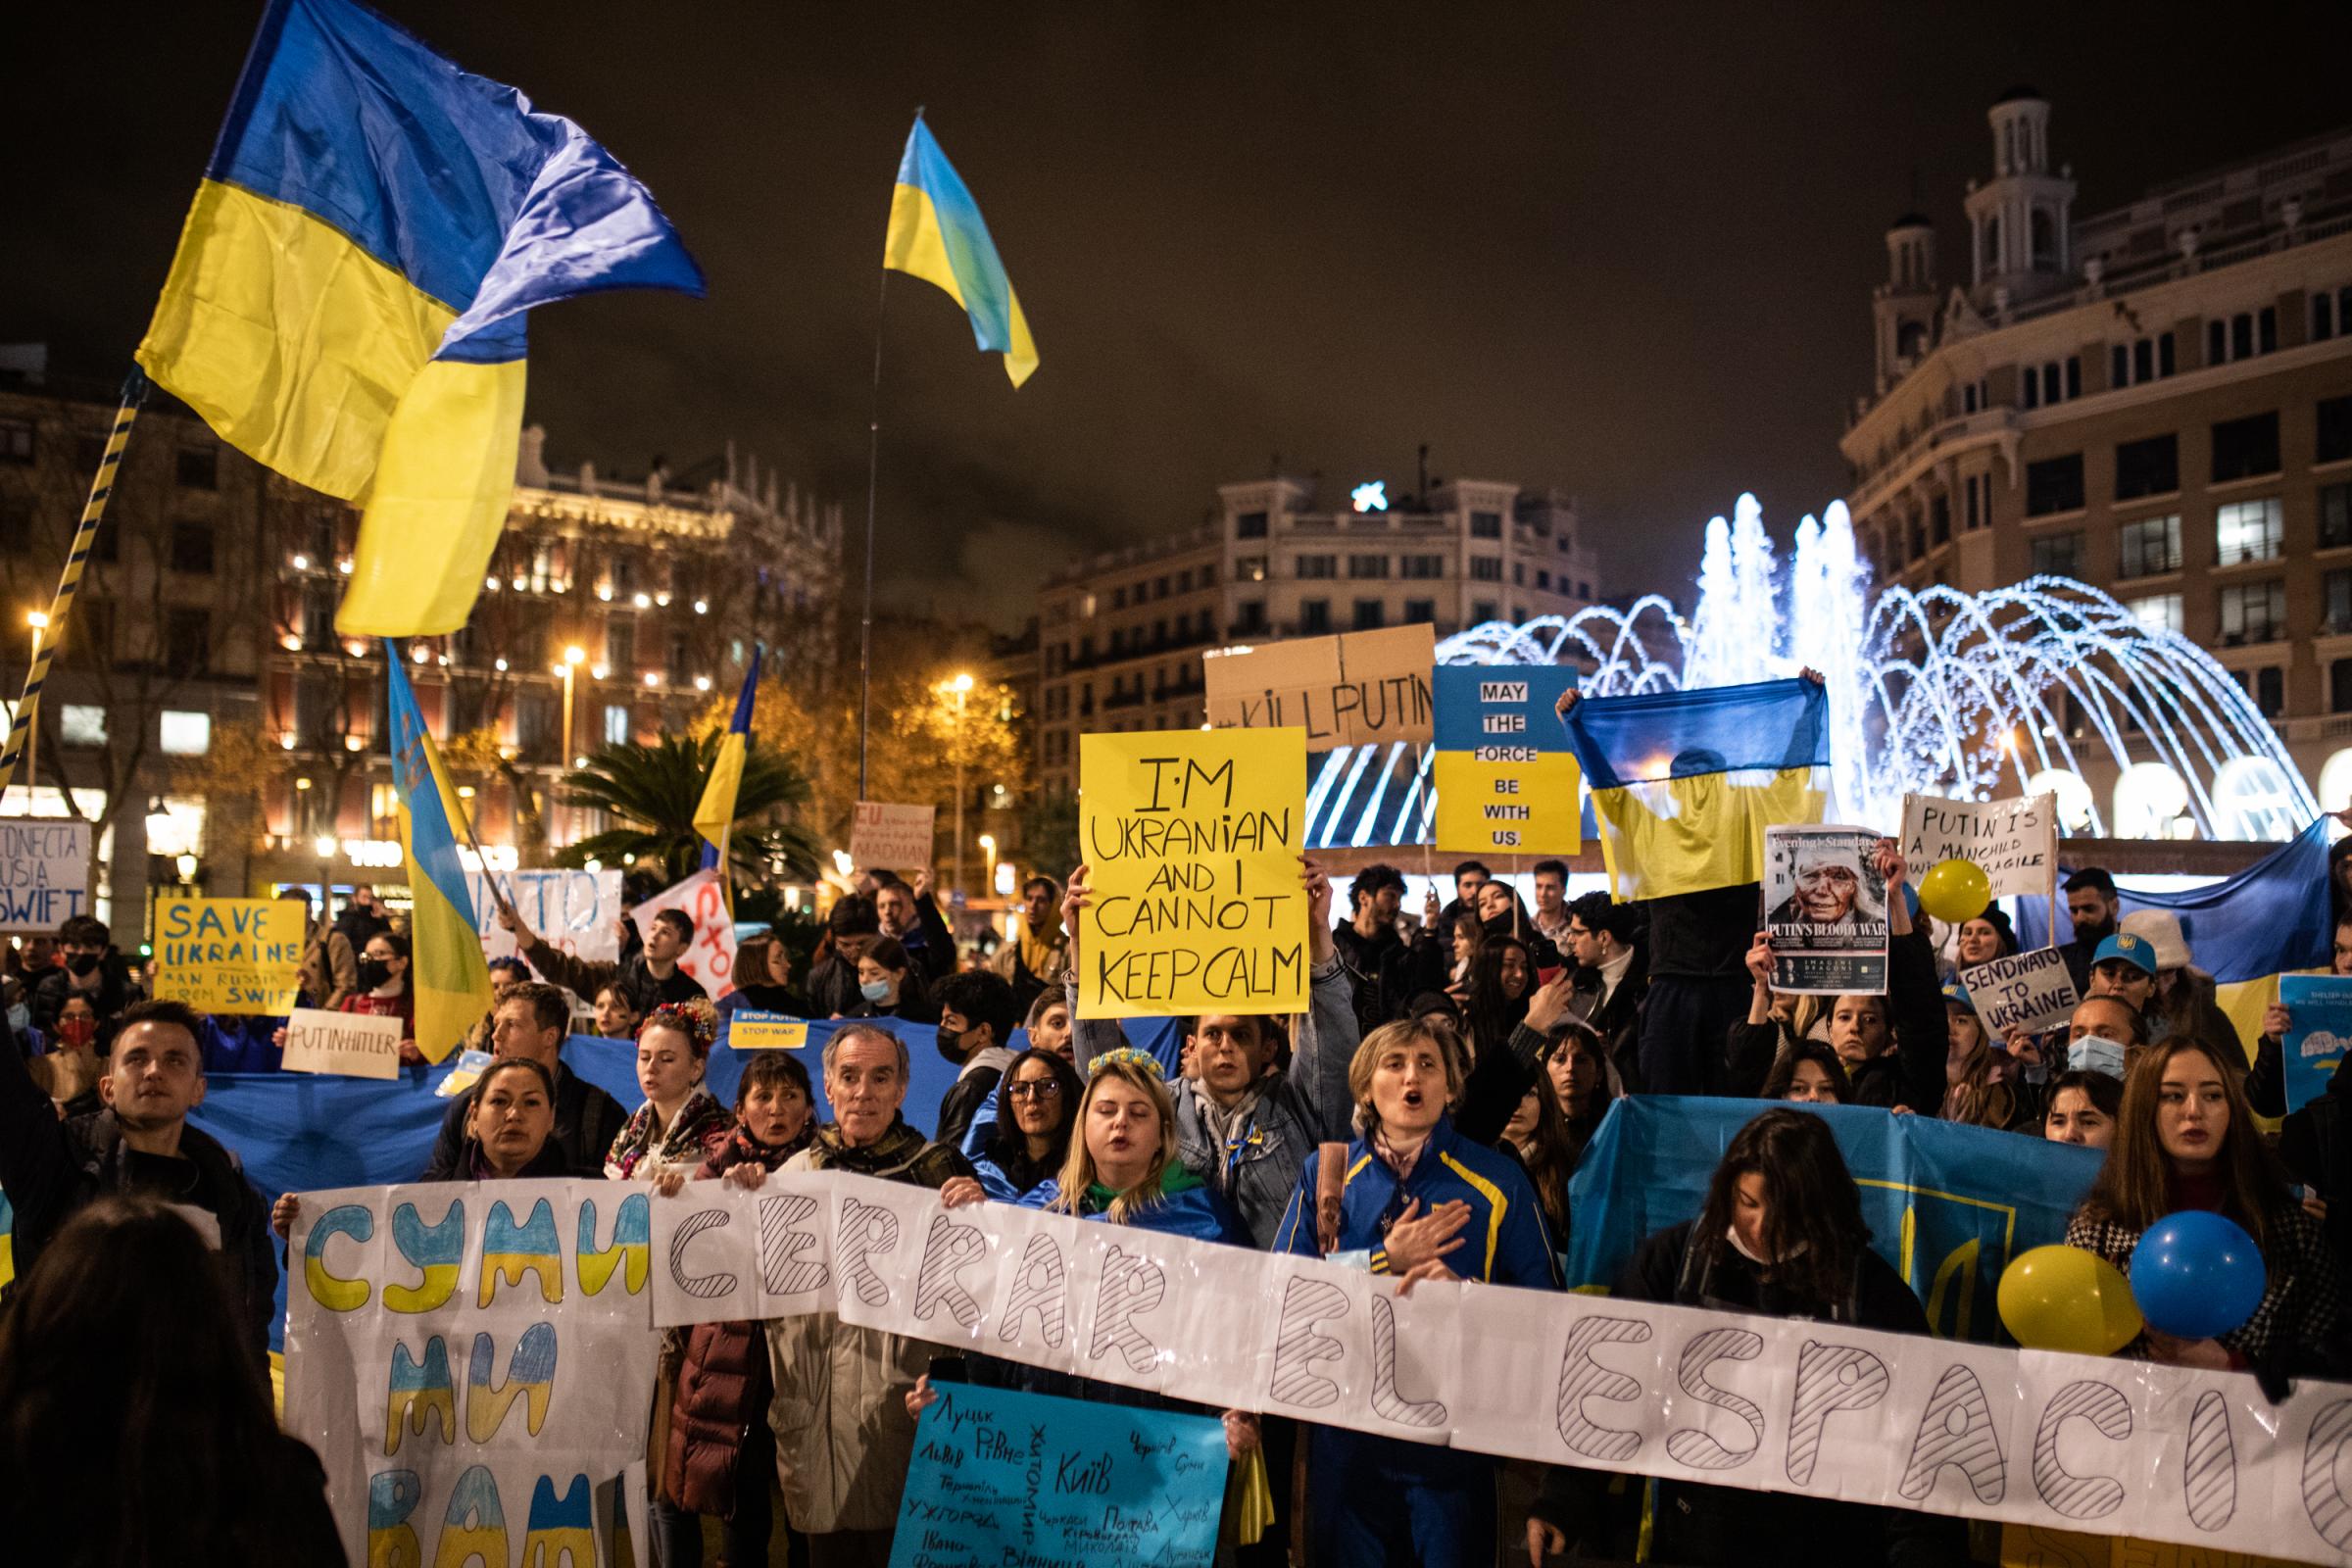 Protestors In Spain Rally For Ukraine After Russian Invasion - BARCELONA, SPAIN - FEBRUARY 25: People take part in a...